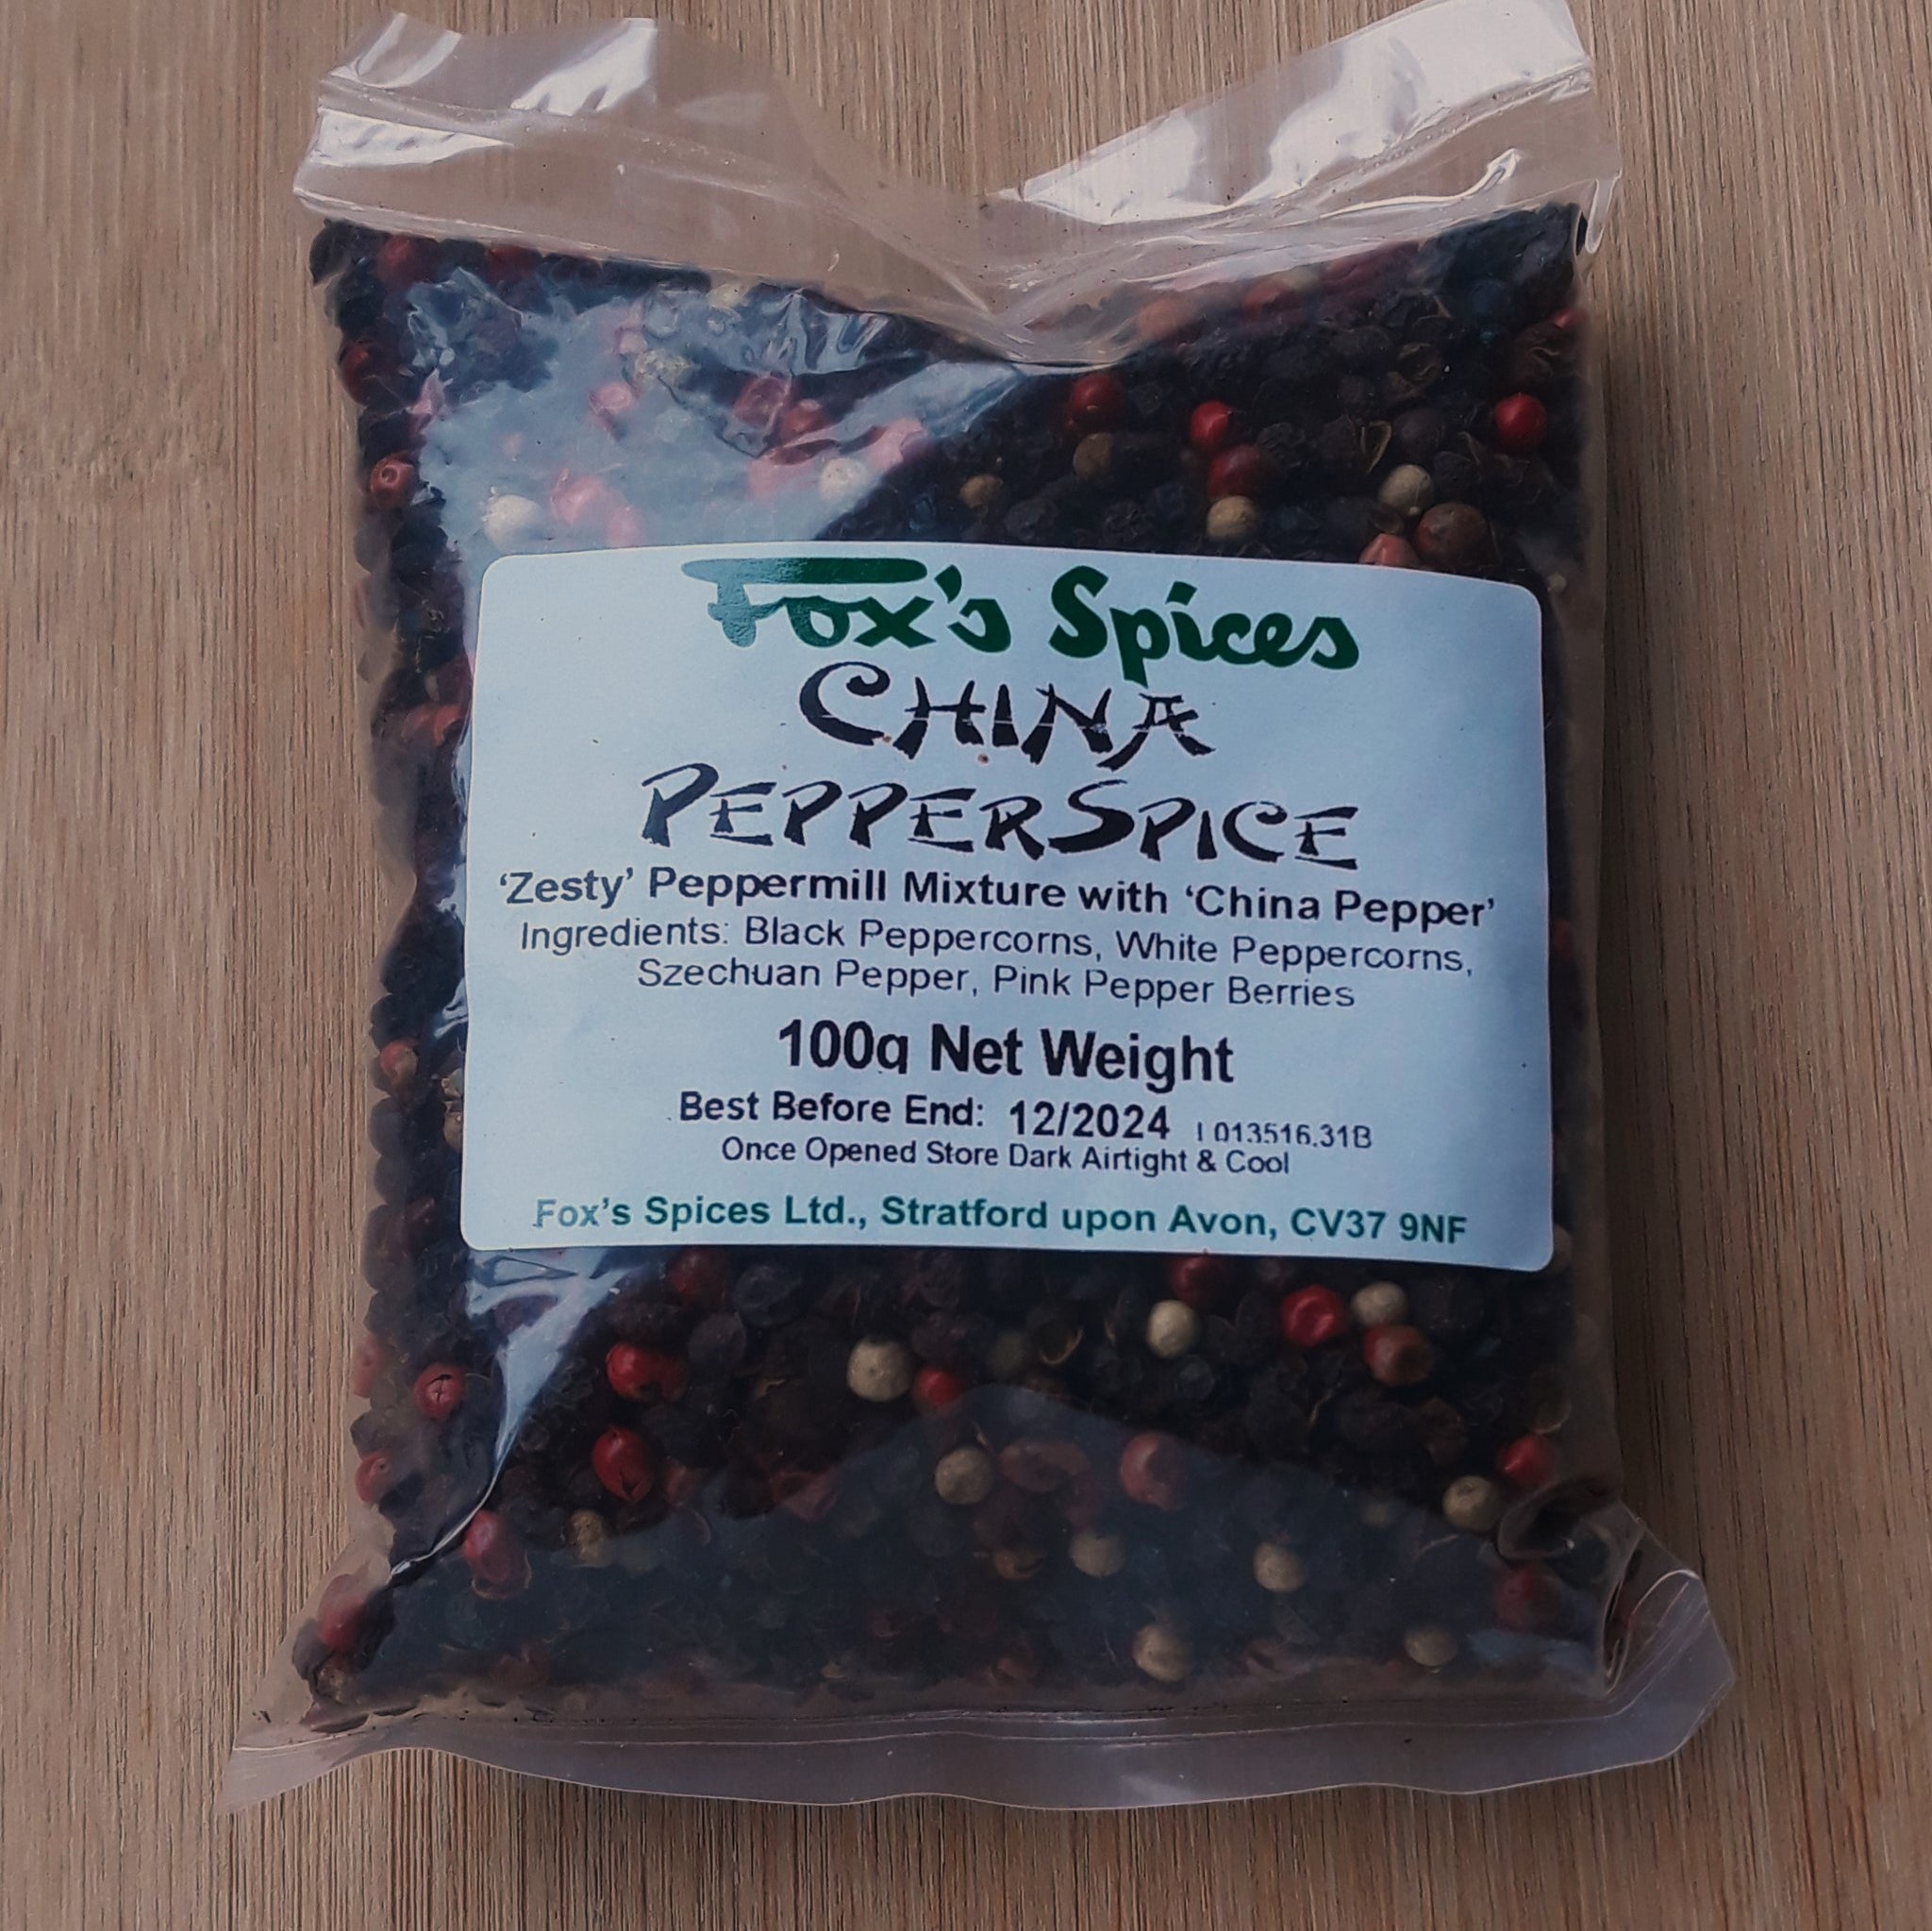 China Pepperspice sold by Fox's spice in 100g bags.